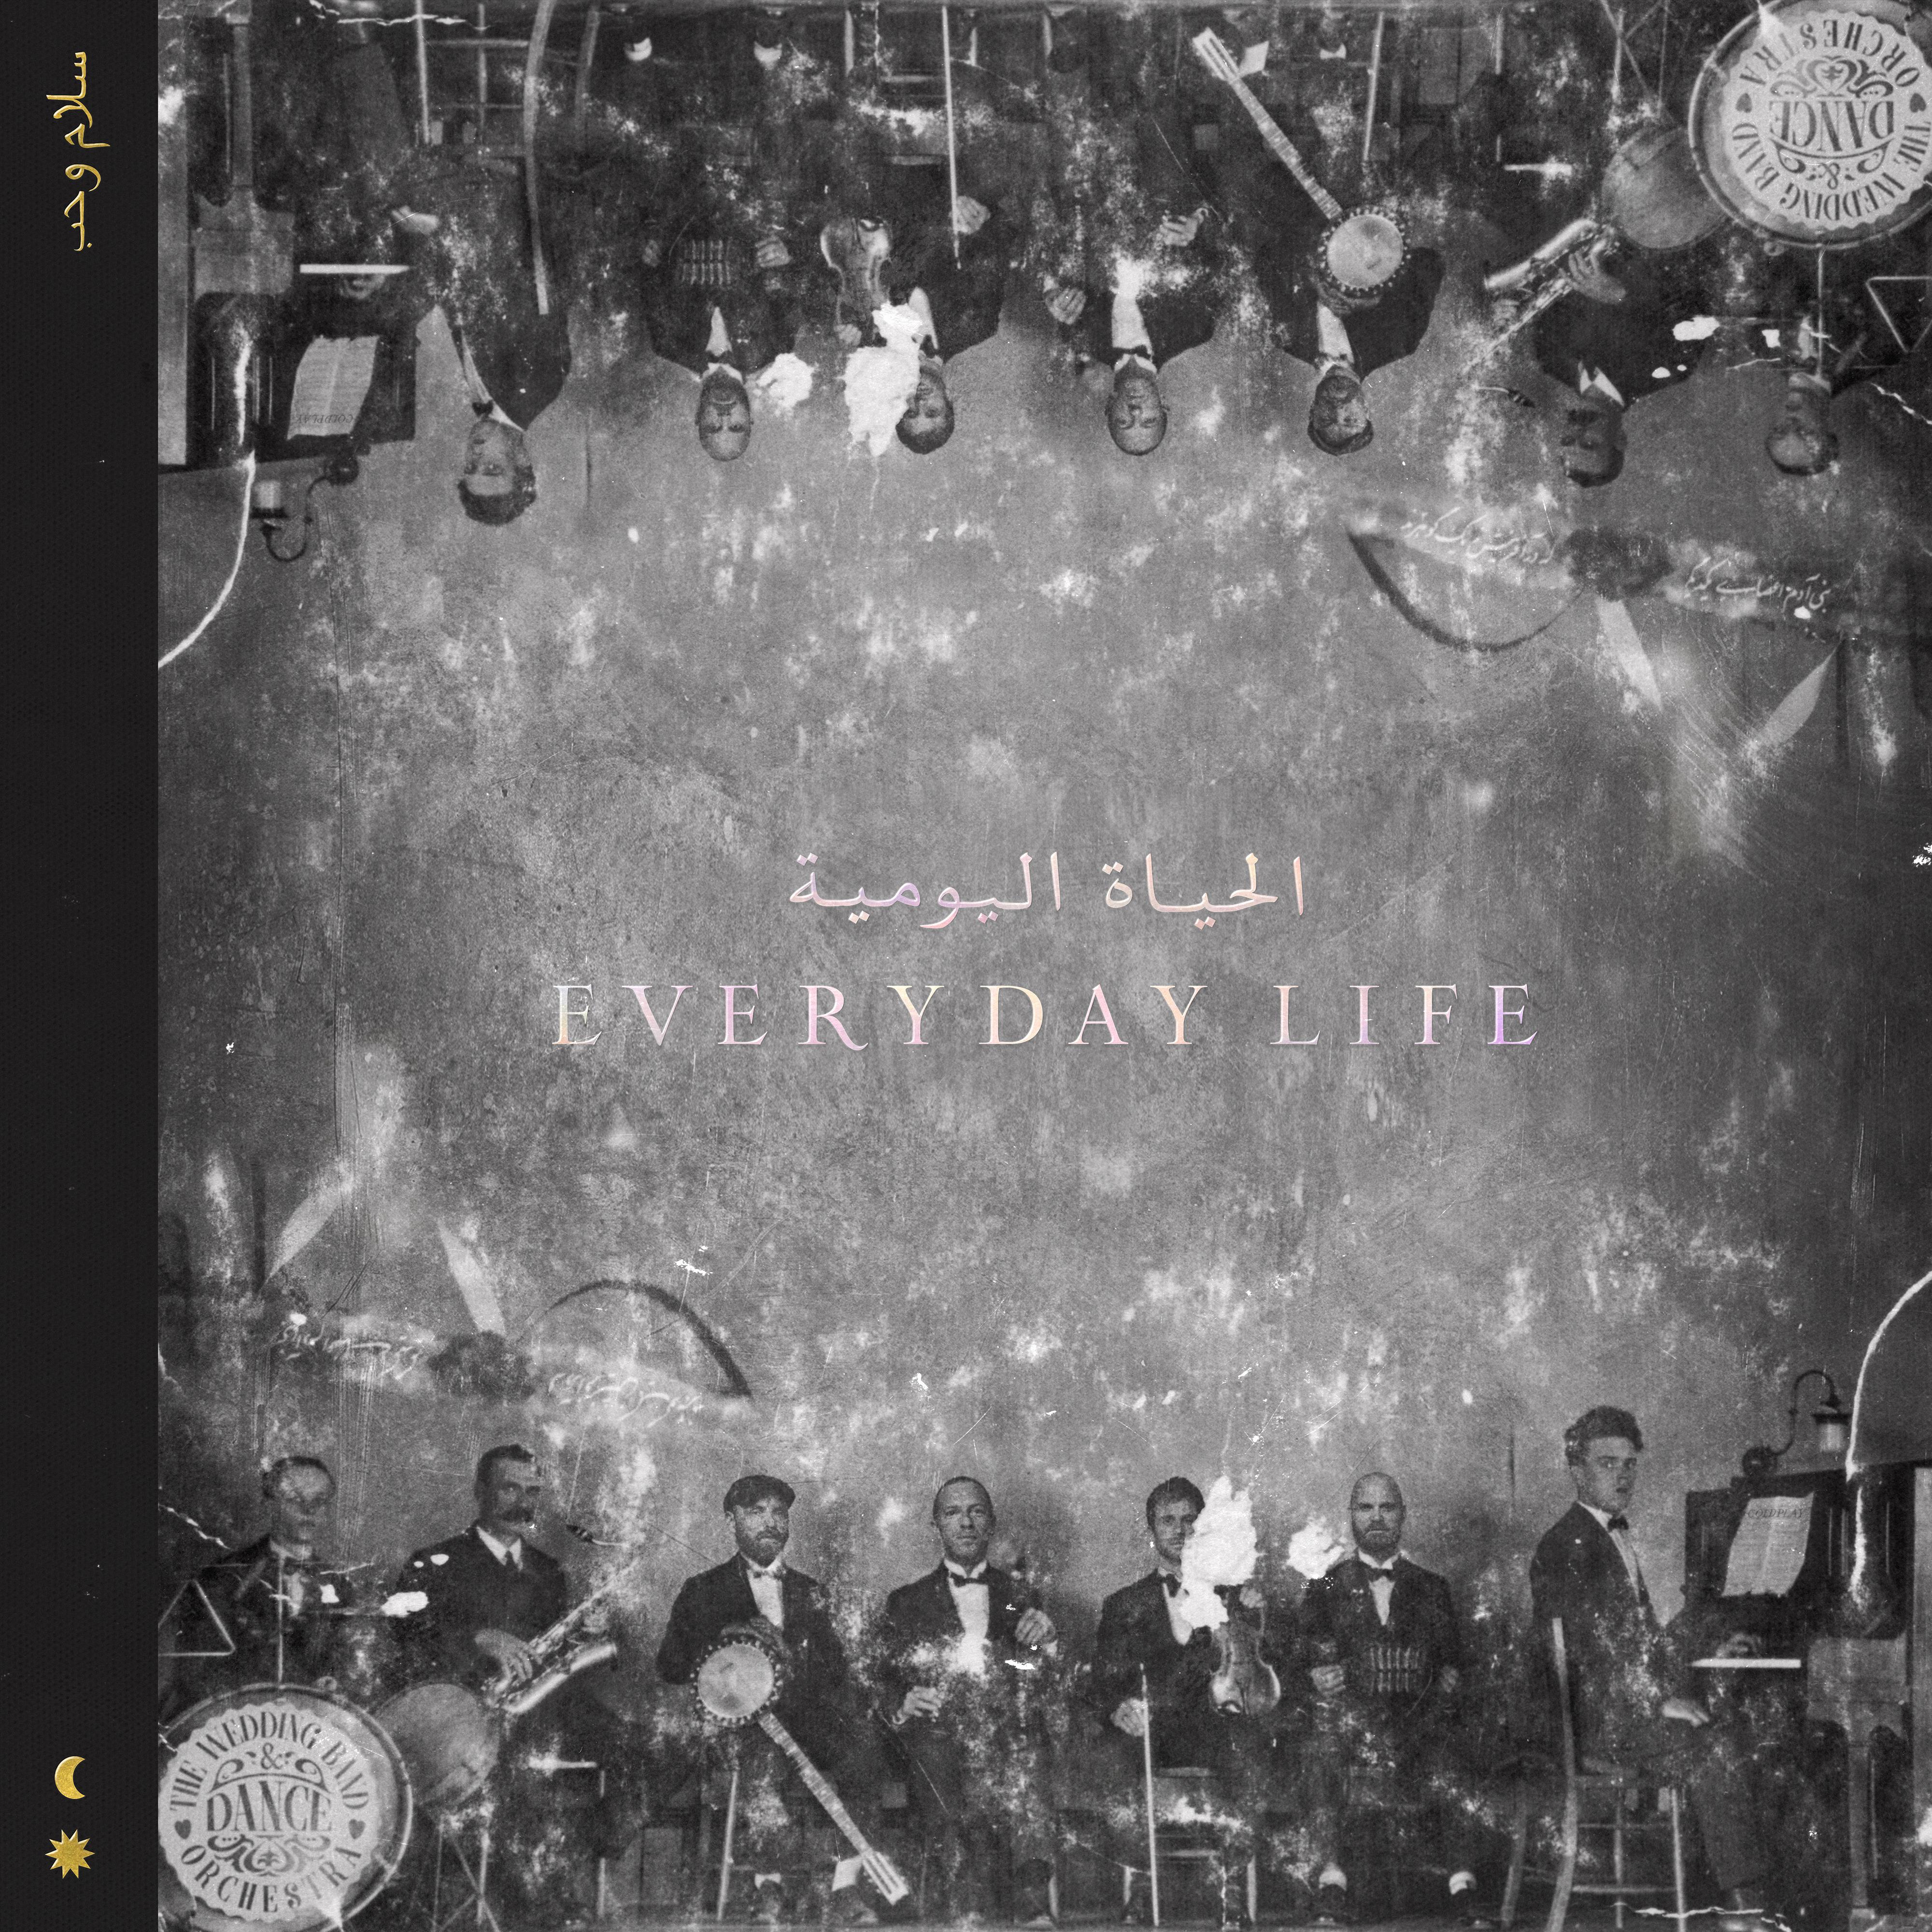 When I Need A Friend歌词 歌手Coldplay-专辑Everyday Life-单曲《When I Need A Friend》LRC歌词下载